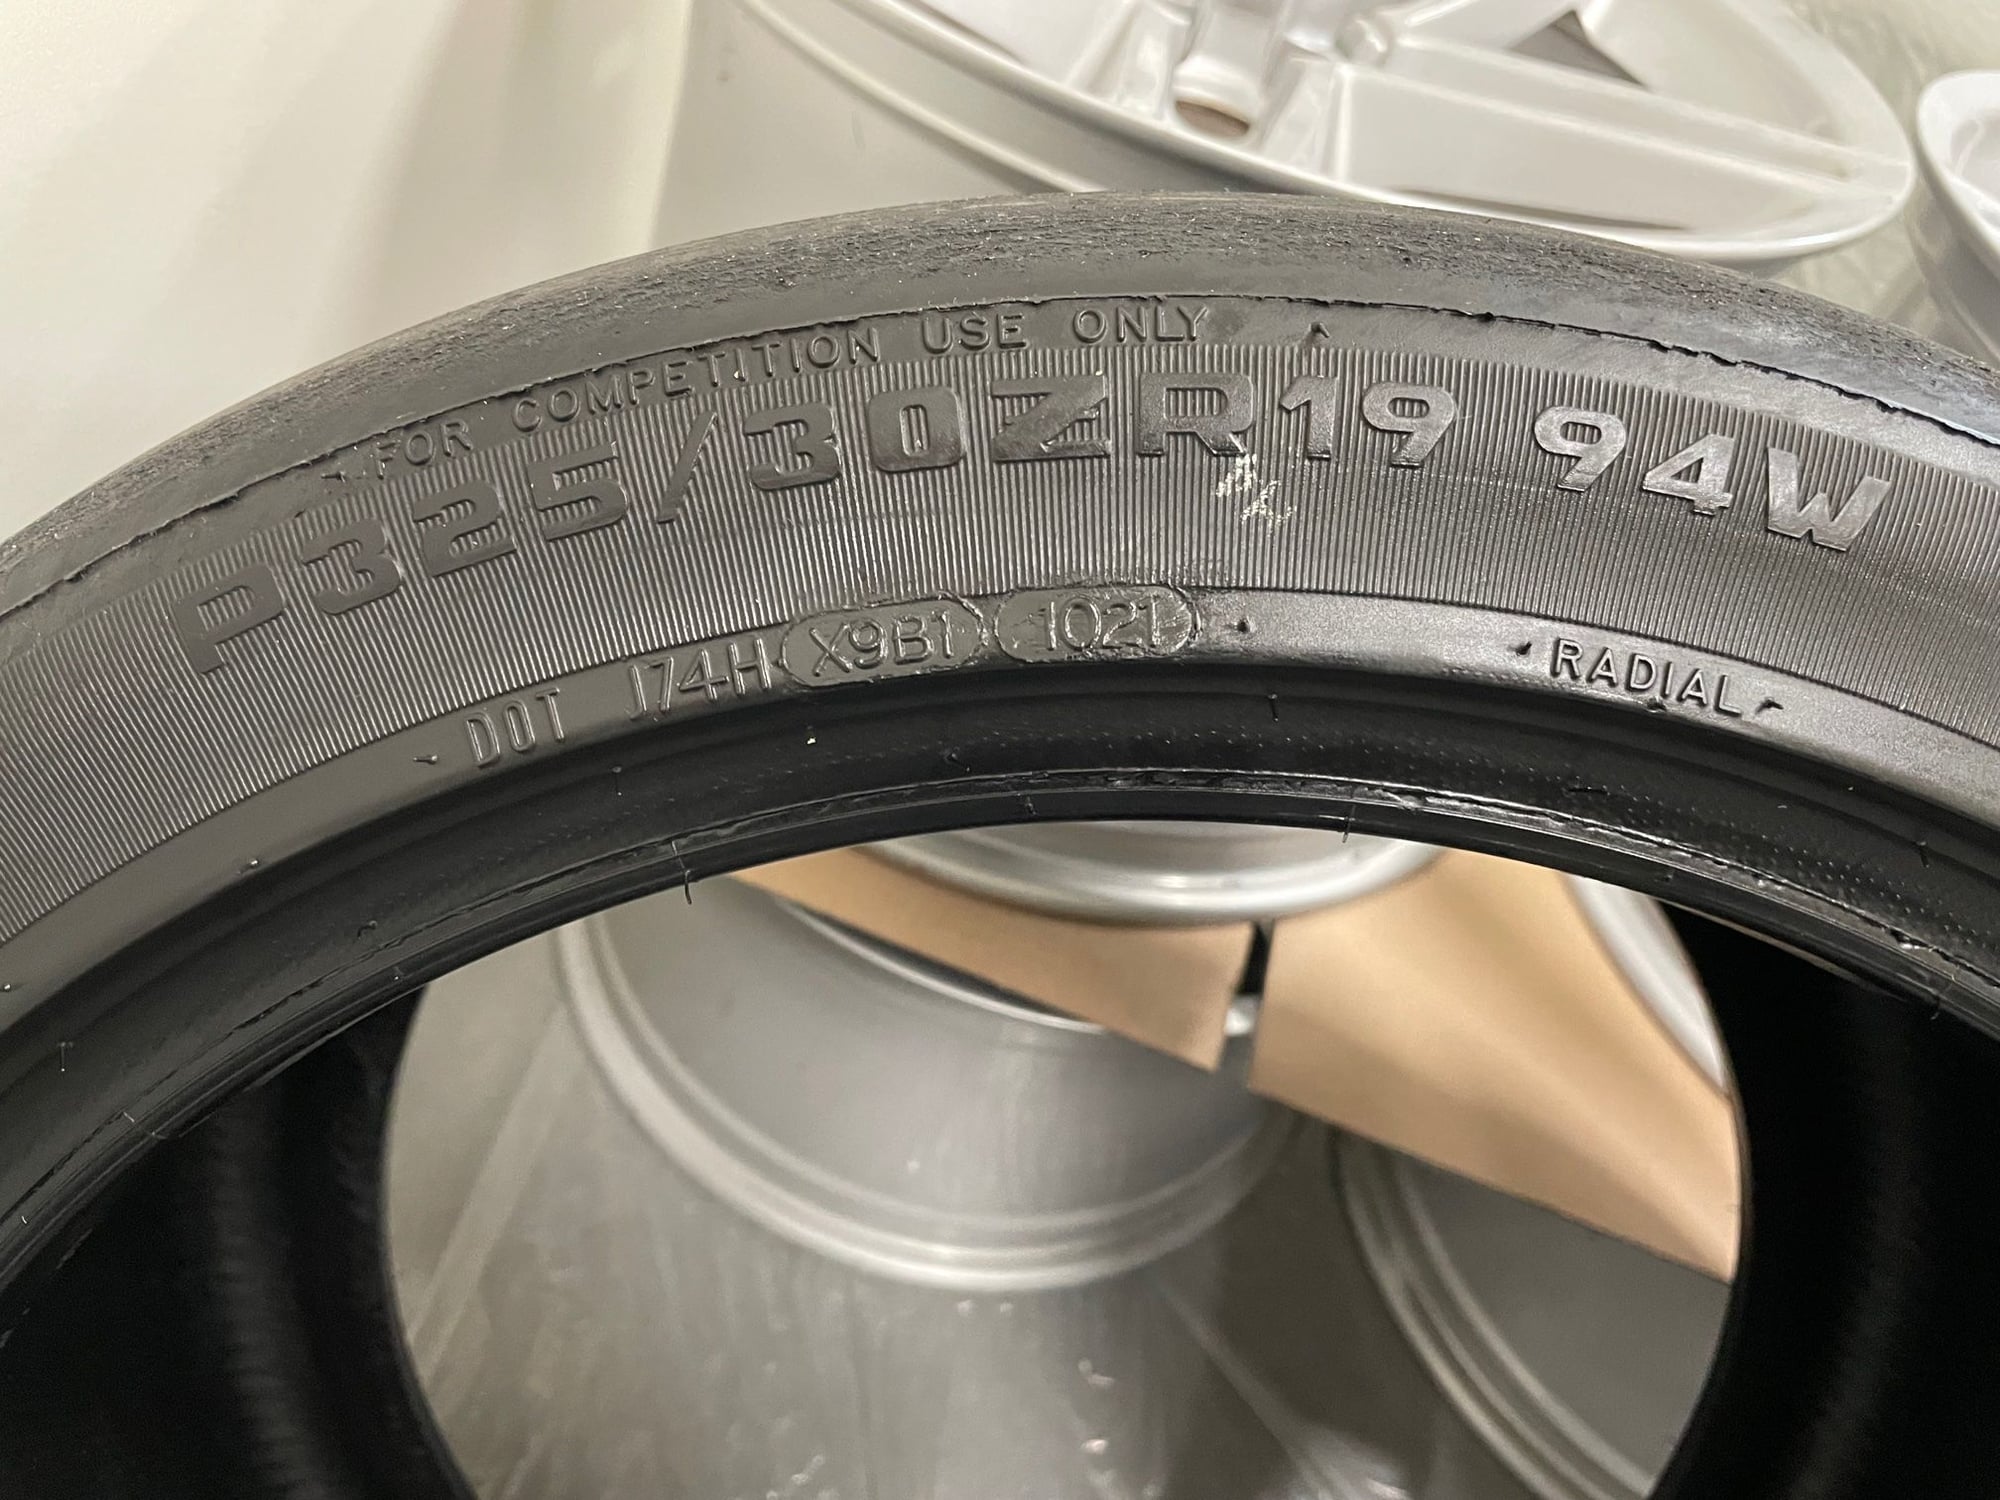 Wheels and Tires/Axles - FOR SALE: R7 Hoosier Tires (2) 325/30/19 - Used - 0  All Models - Allentown, PA 18106, United States